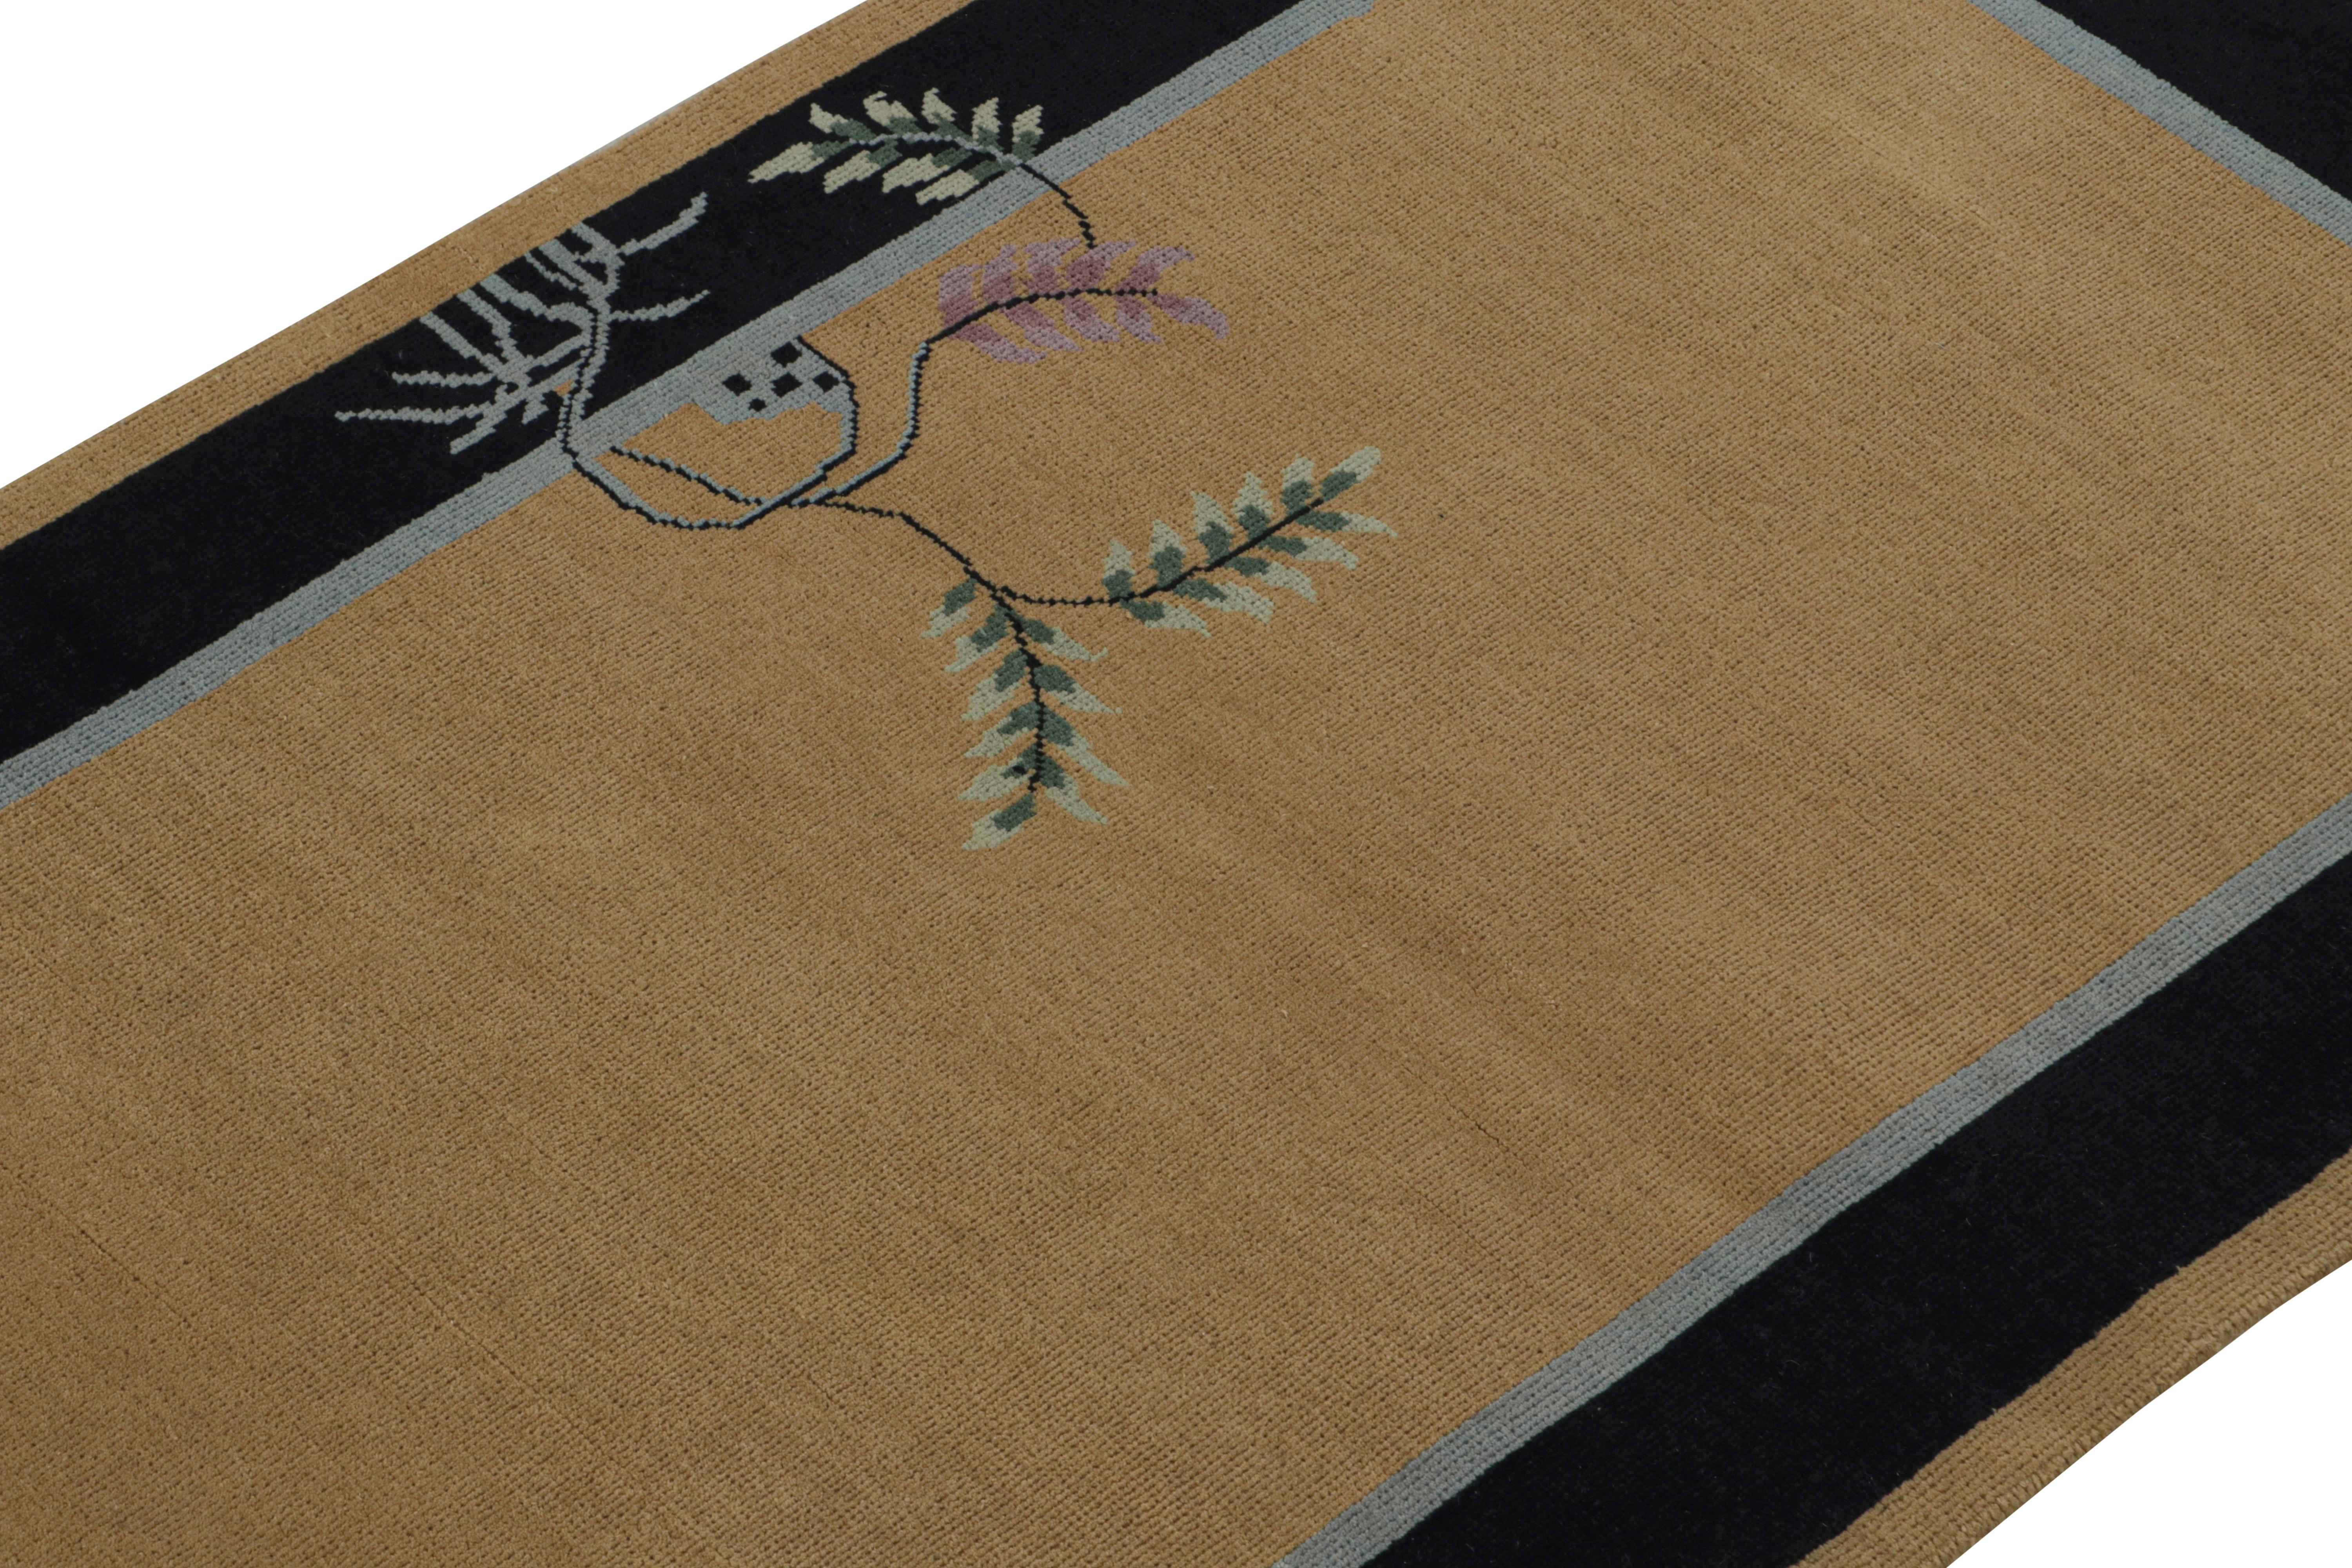 This 3x5 rug is an exciting new addition to the Art Deco collection by Rug & Kilim.  

On the Design: 

Hand-knotted in wool, this contemporary piece recaptures the Chinese Art Deco rug style of the 1920s. Its minimal design features a single floral